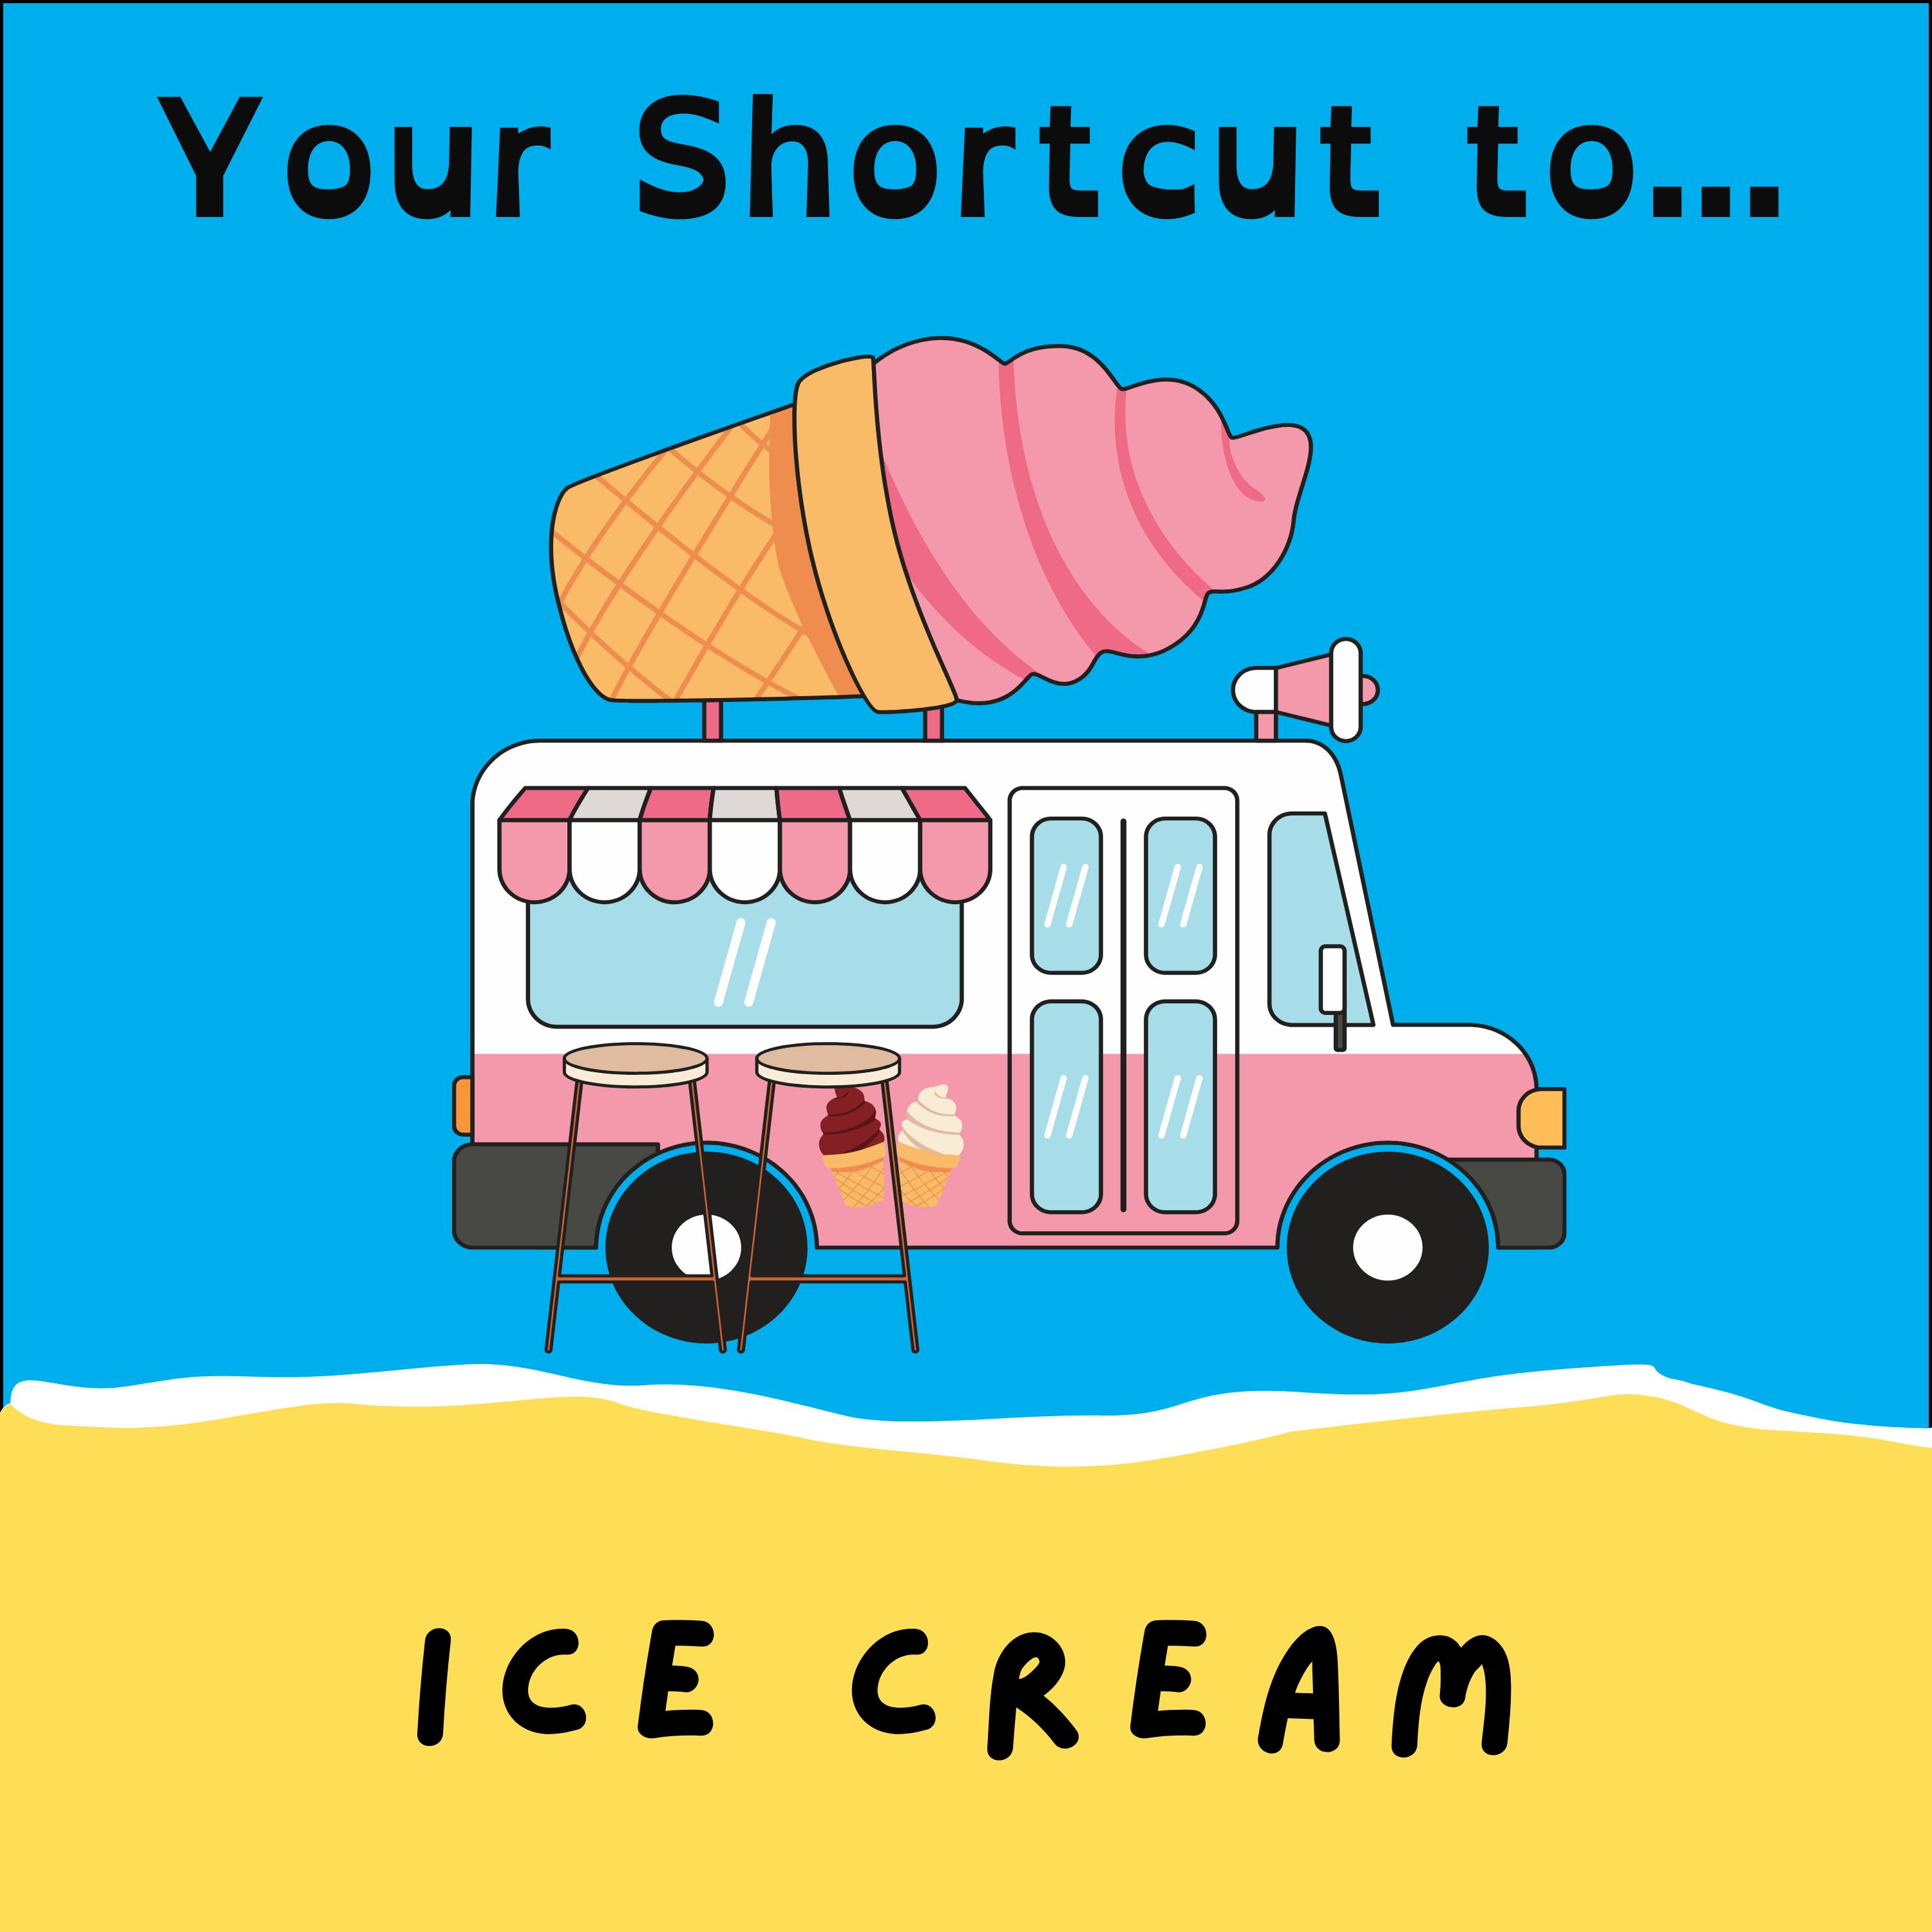 Your Shortcut to... Ice Cream